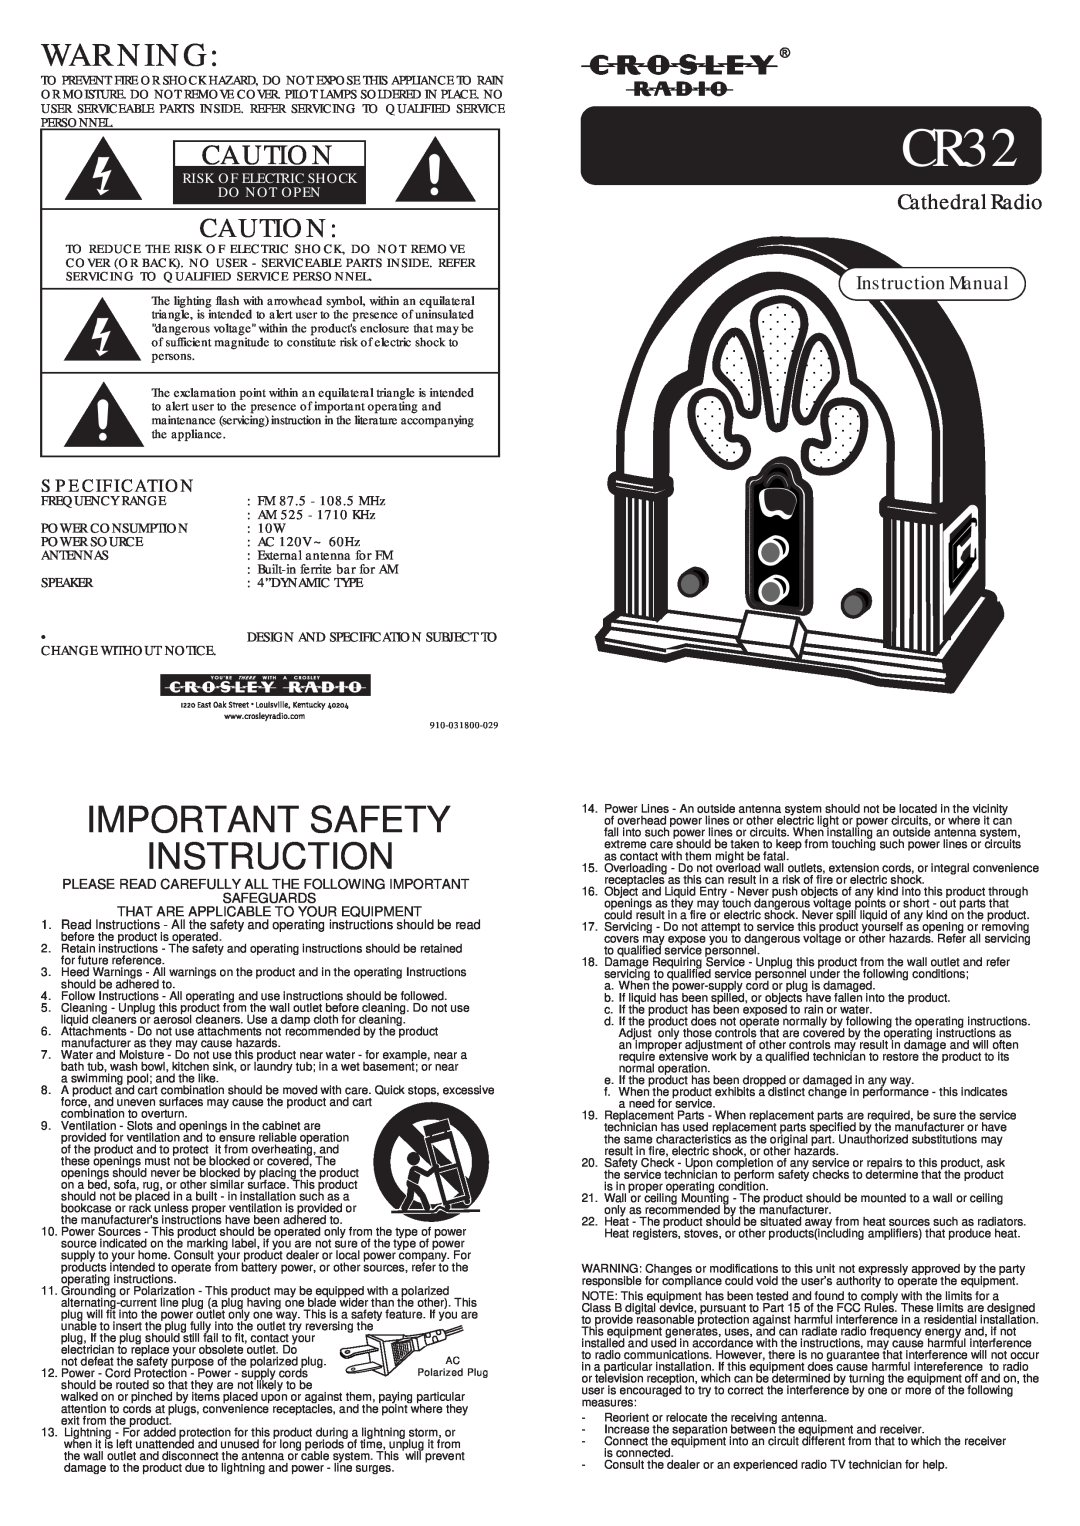 Crosley Radio CR32 instruction manual Specification, Important Safety Instruction, Cathedral Radio 